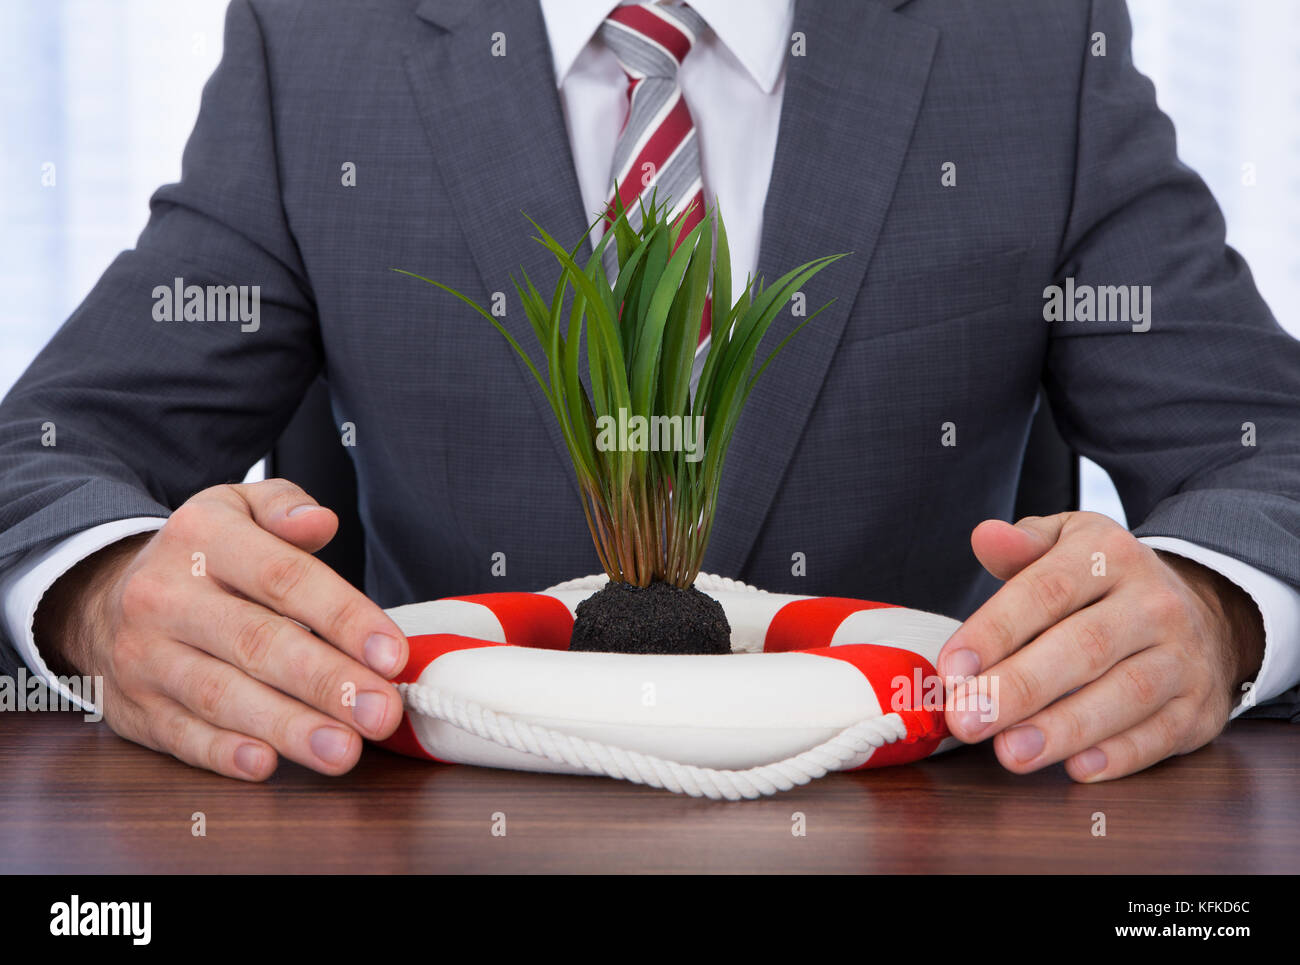 Midsection of businessman protecting saplings with lifebuoy at desk Stock Photo